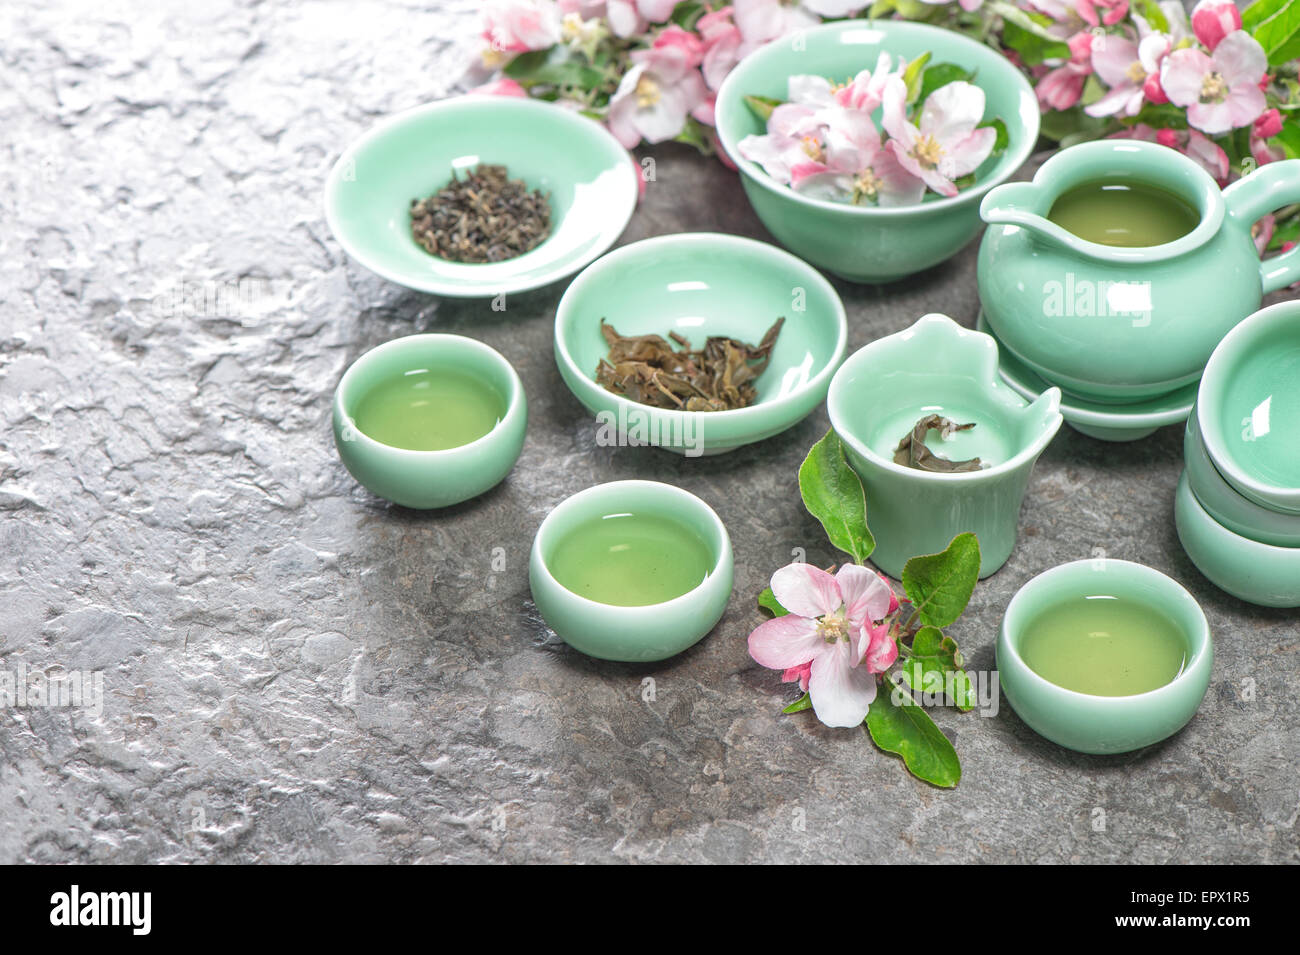 Teapot and cups with spring apple blossoms. Utensils for traditional chinese tea ceremony Stock Photo